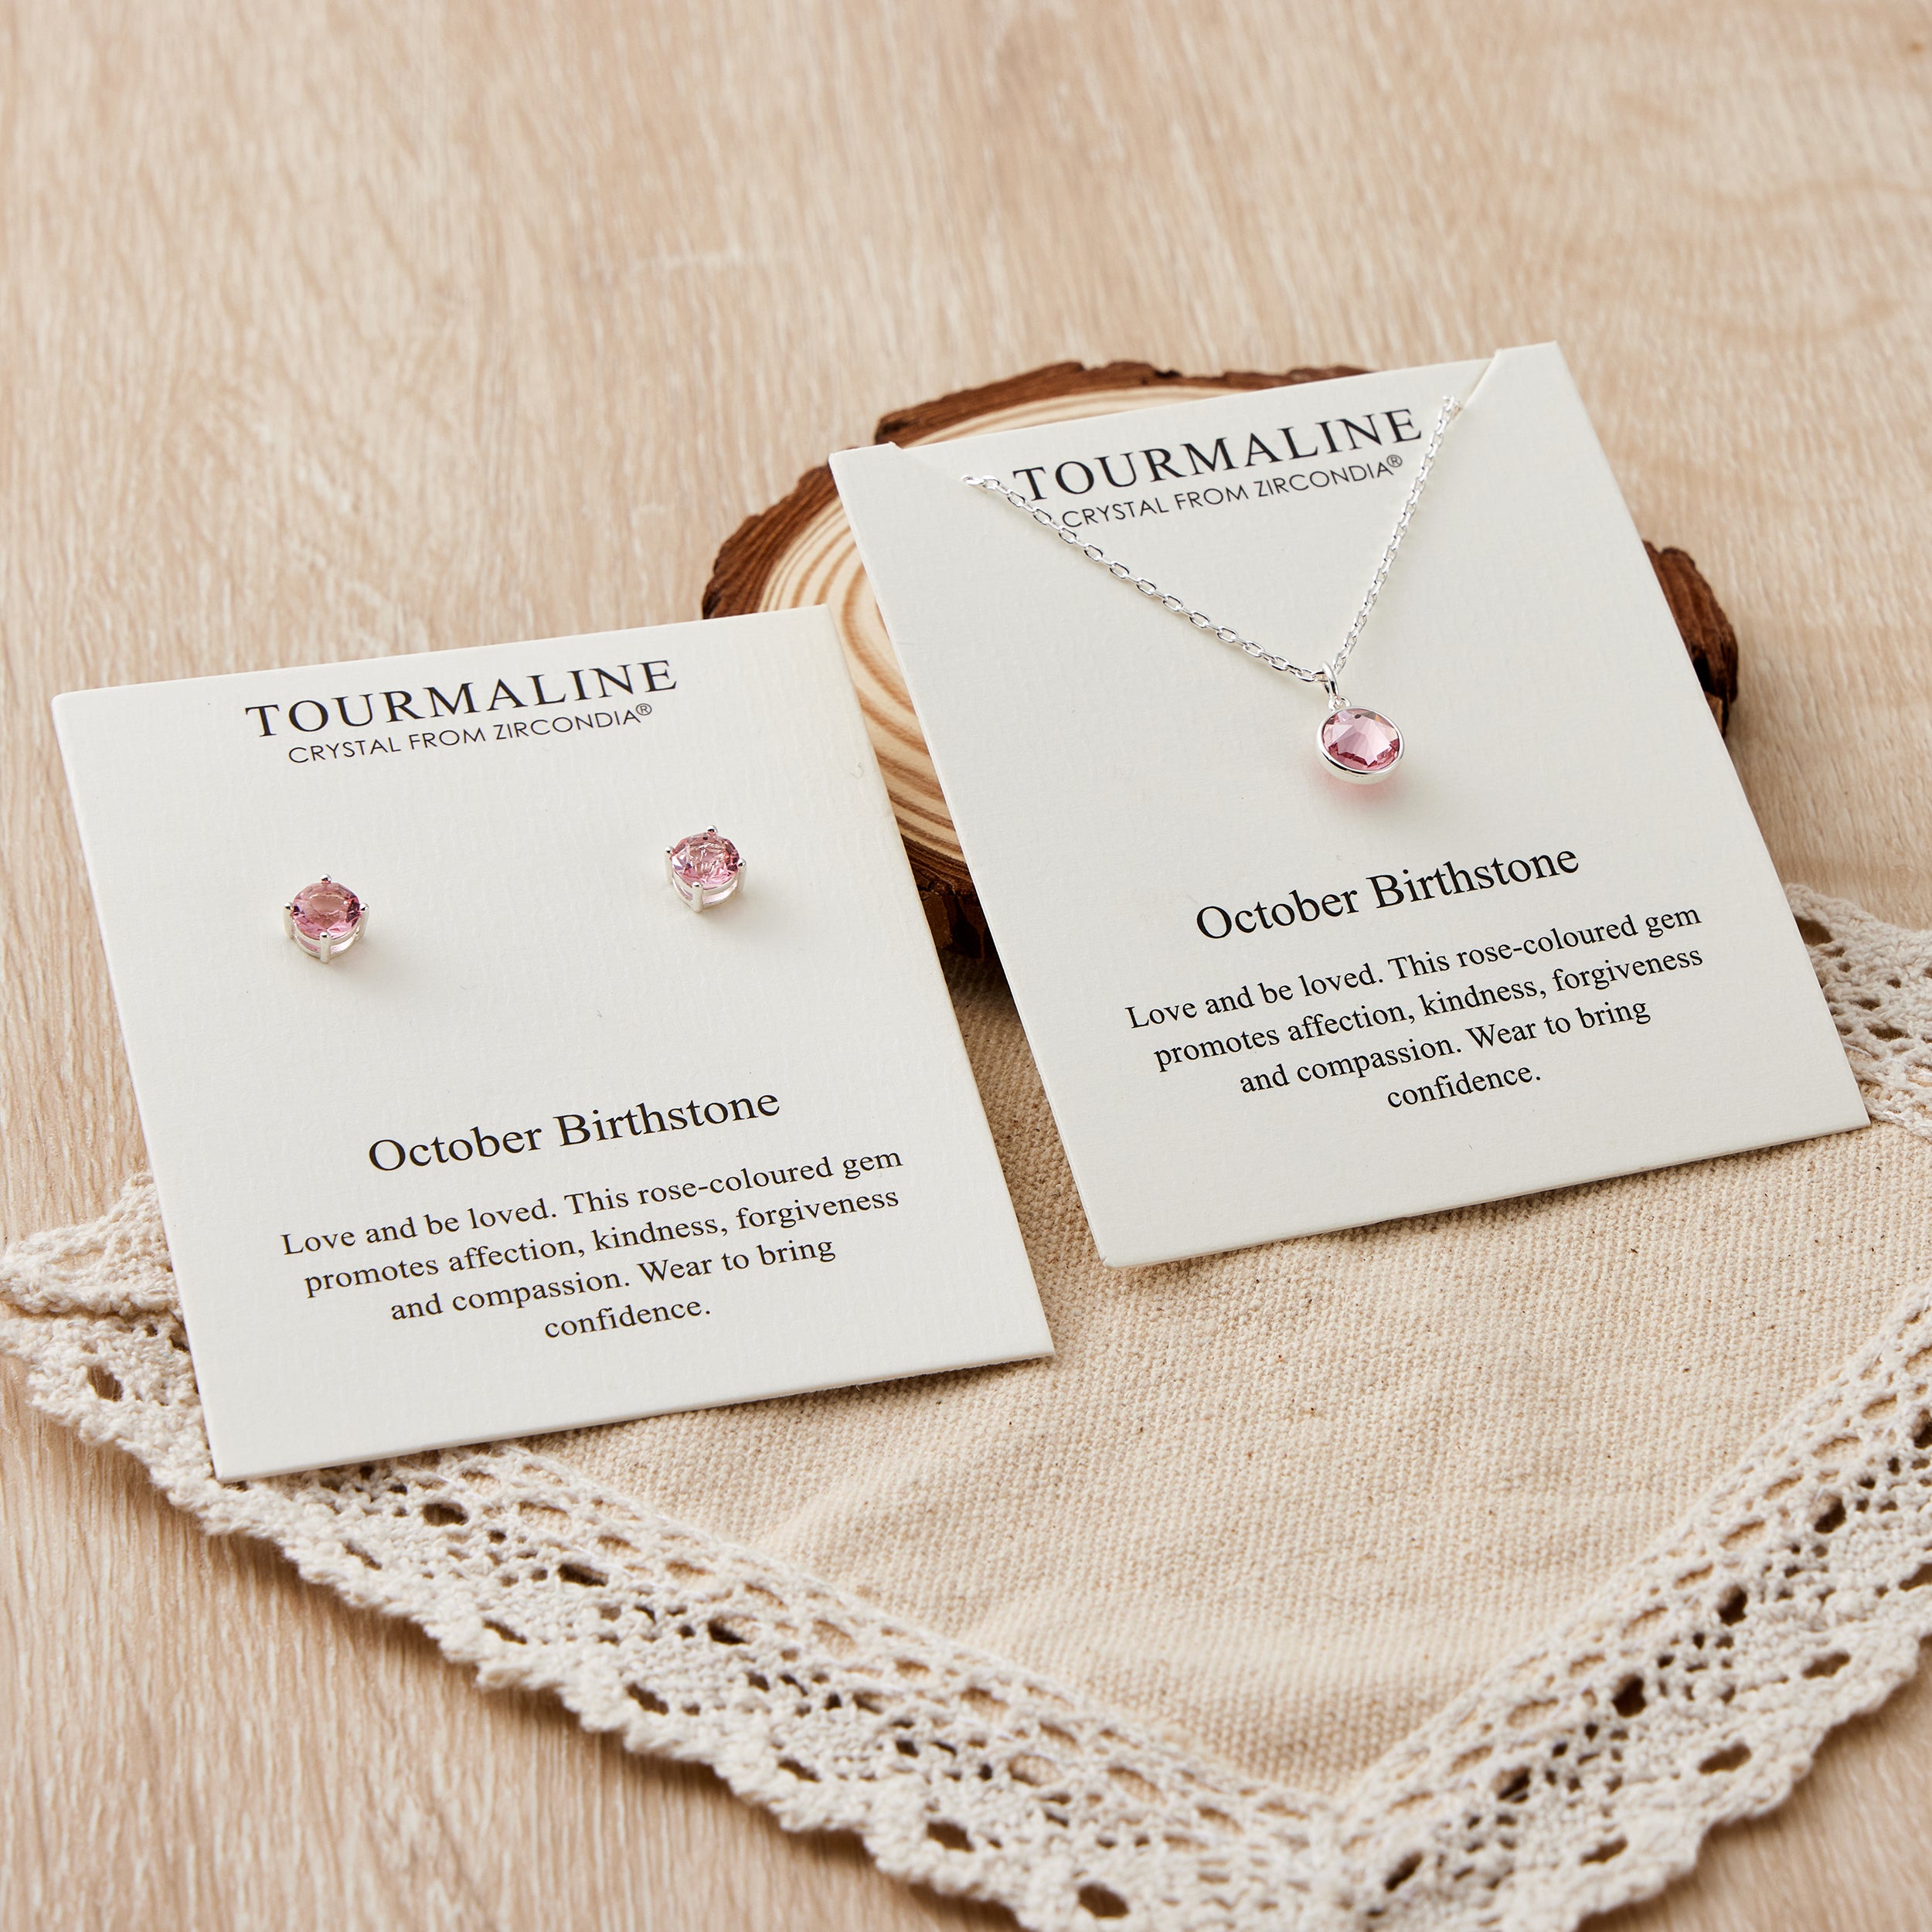 October (Tourmaline) Birthstone Necklace & Earrings Set Created with Zircondia® Crystals